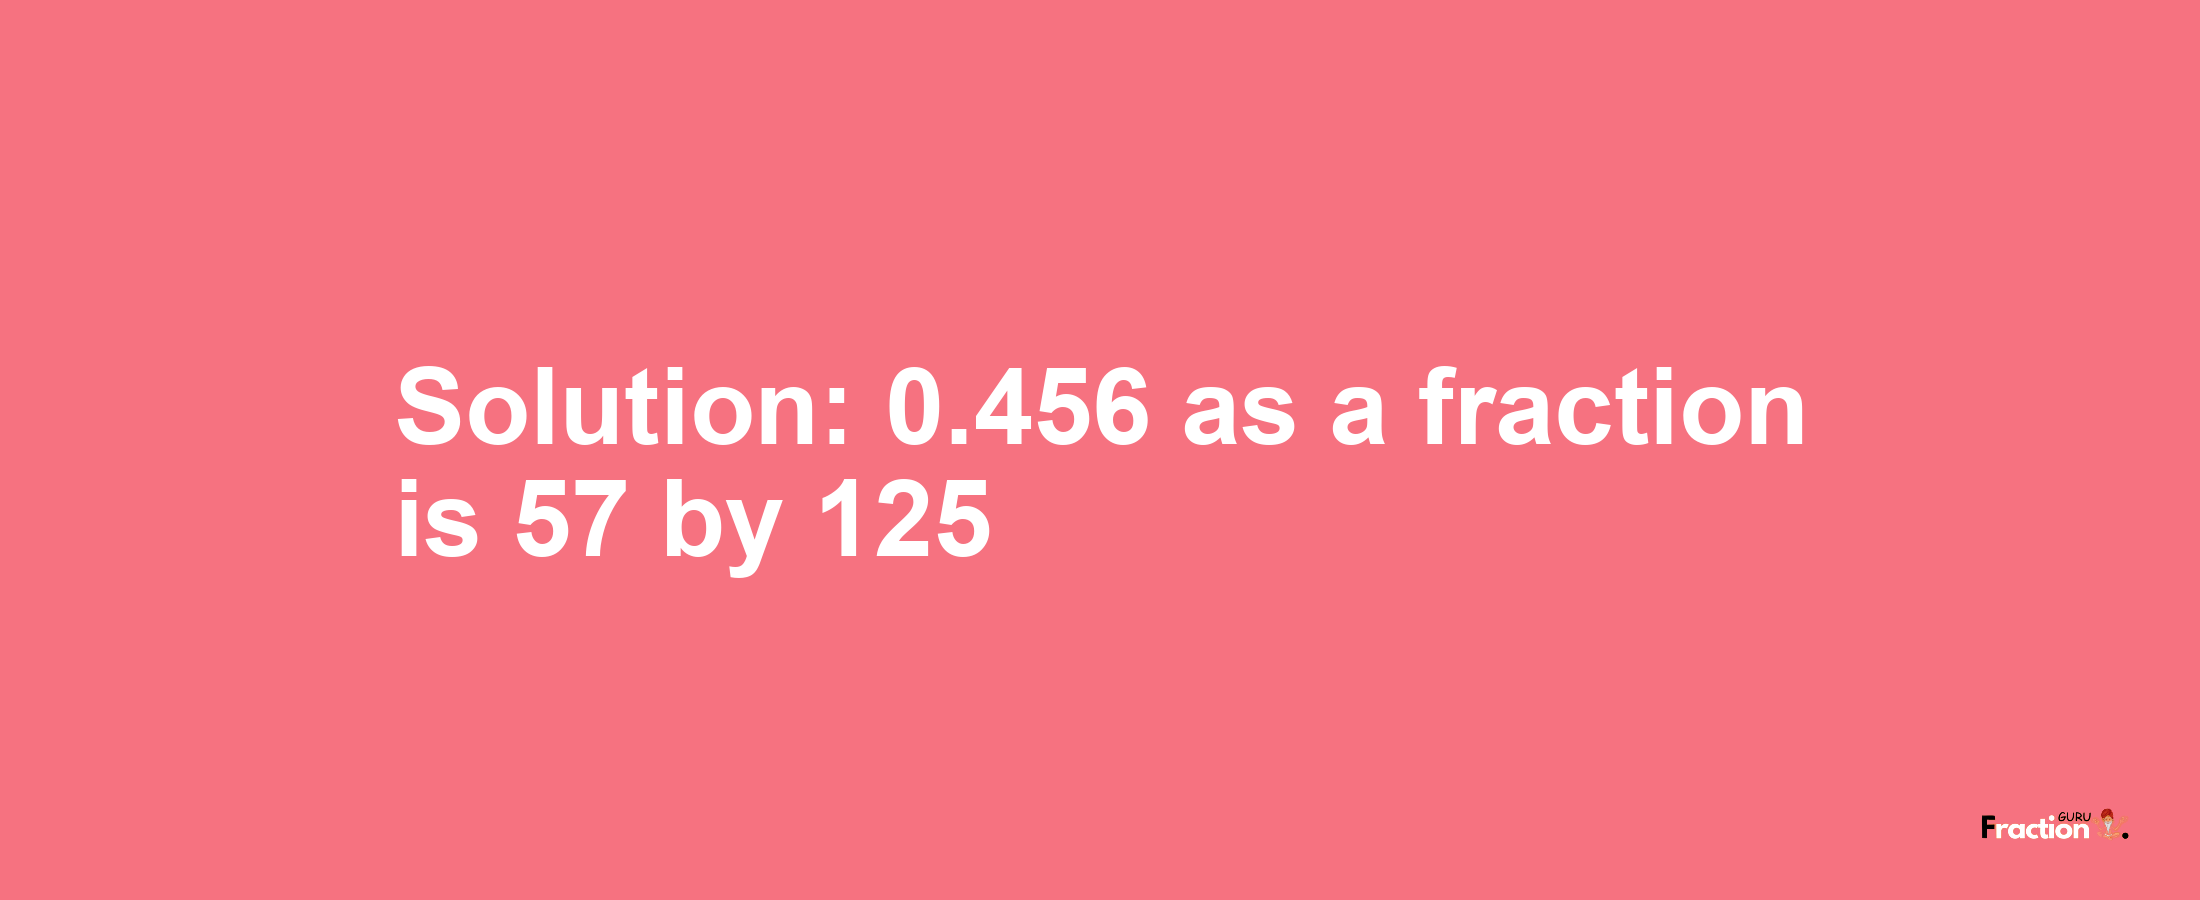 Solution:0.456 as a fraction is 57/125